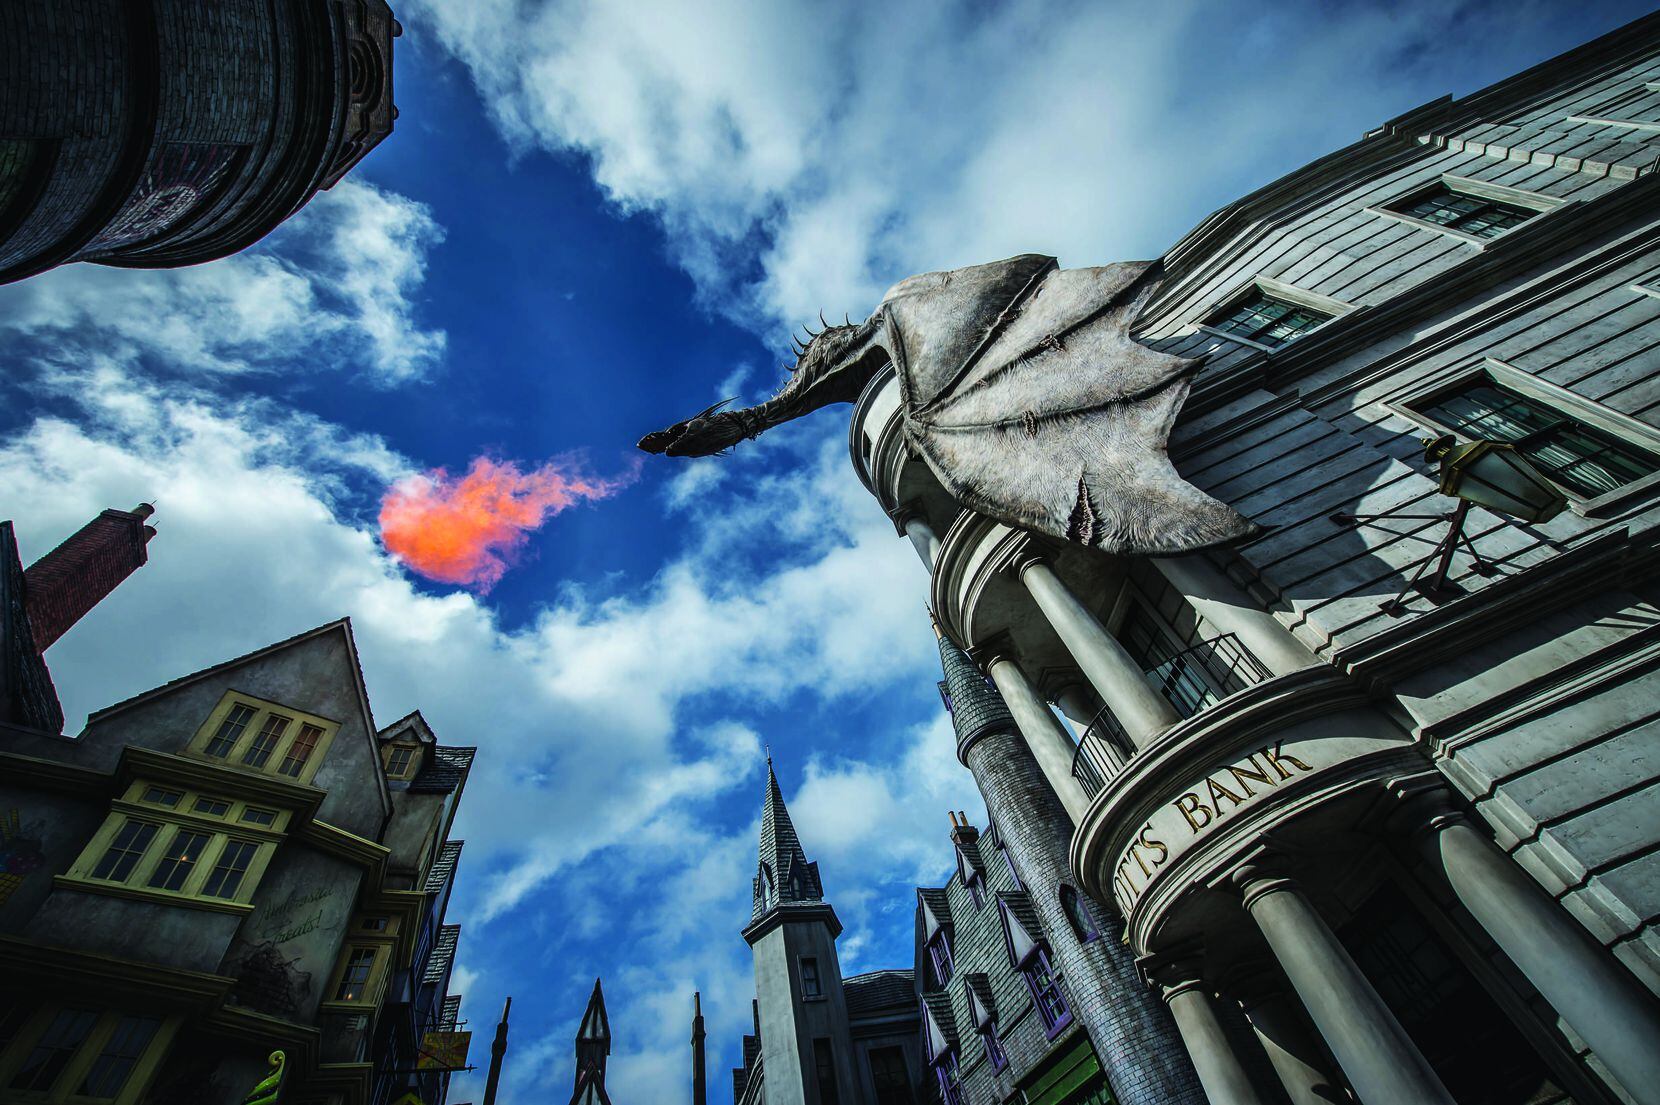 At the Wizarding World of Harry Potter, Gringotts Bank in Diagon Alley is a real...